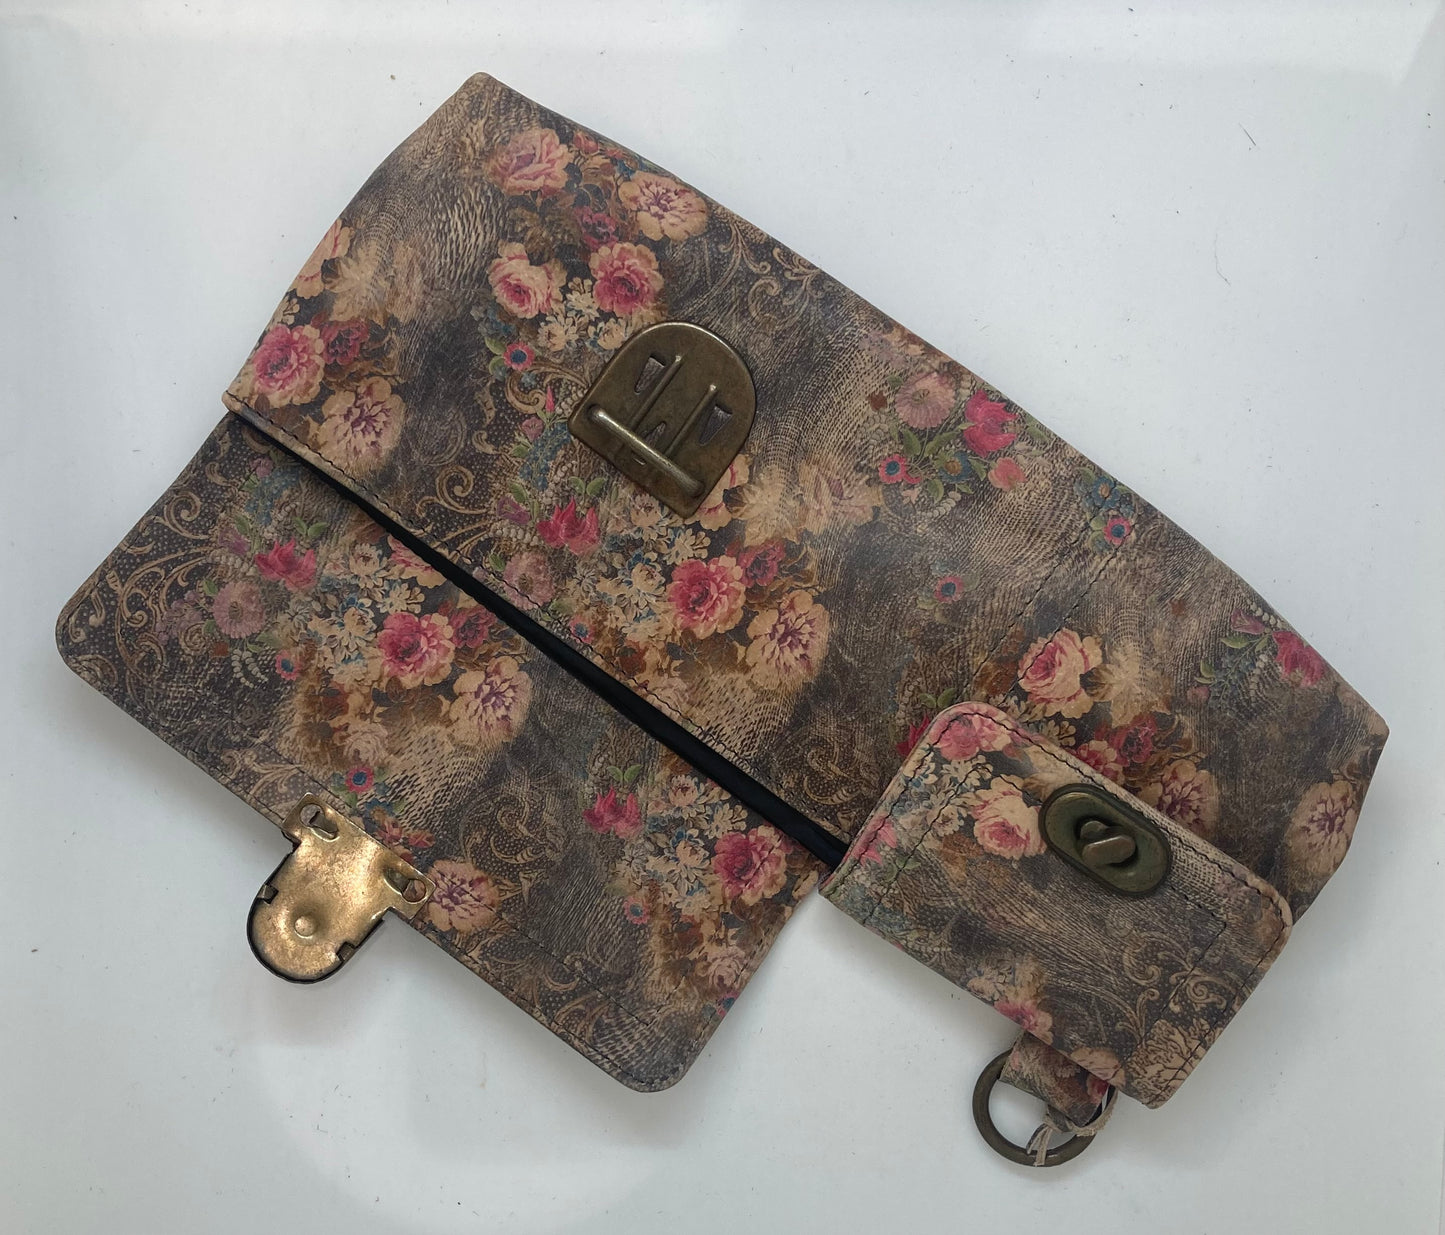 ODI LYNCH JILLY CONVERTABLE BUMBAG IN VINTAGE FLORAL